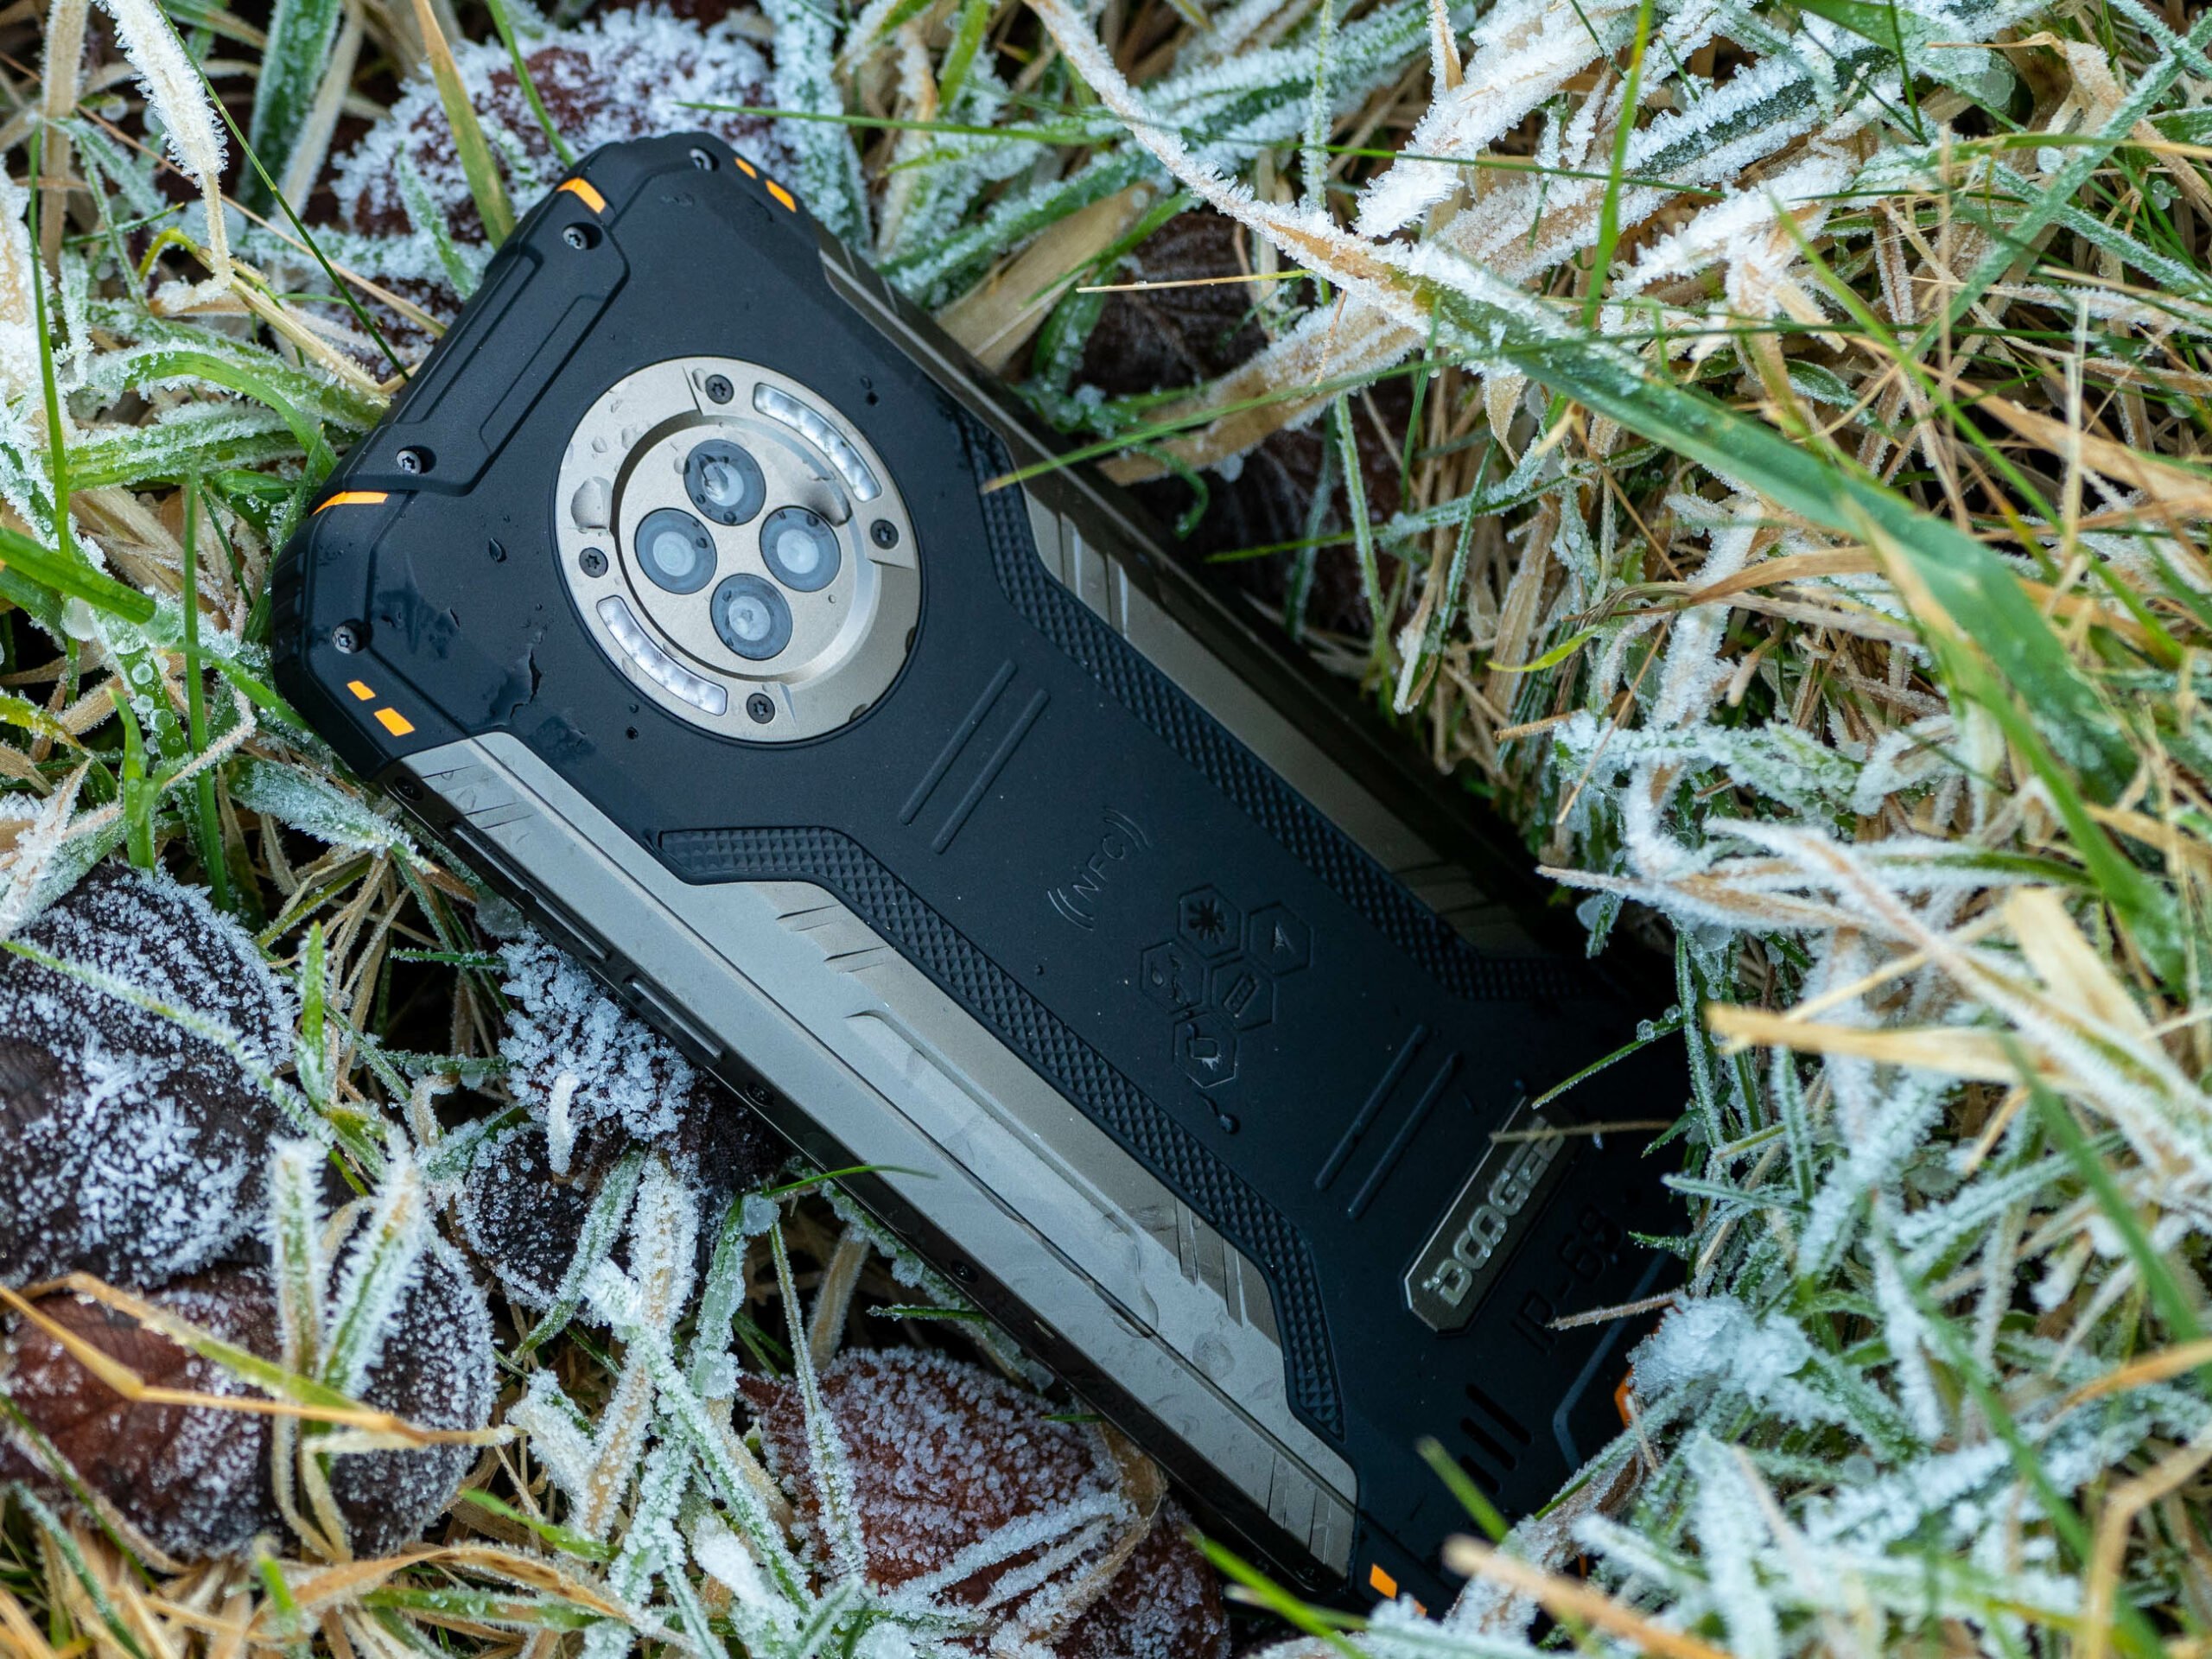 Doogee S96 Pro: an ideal rugged smartphone for outdoor enthusiasts